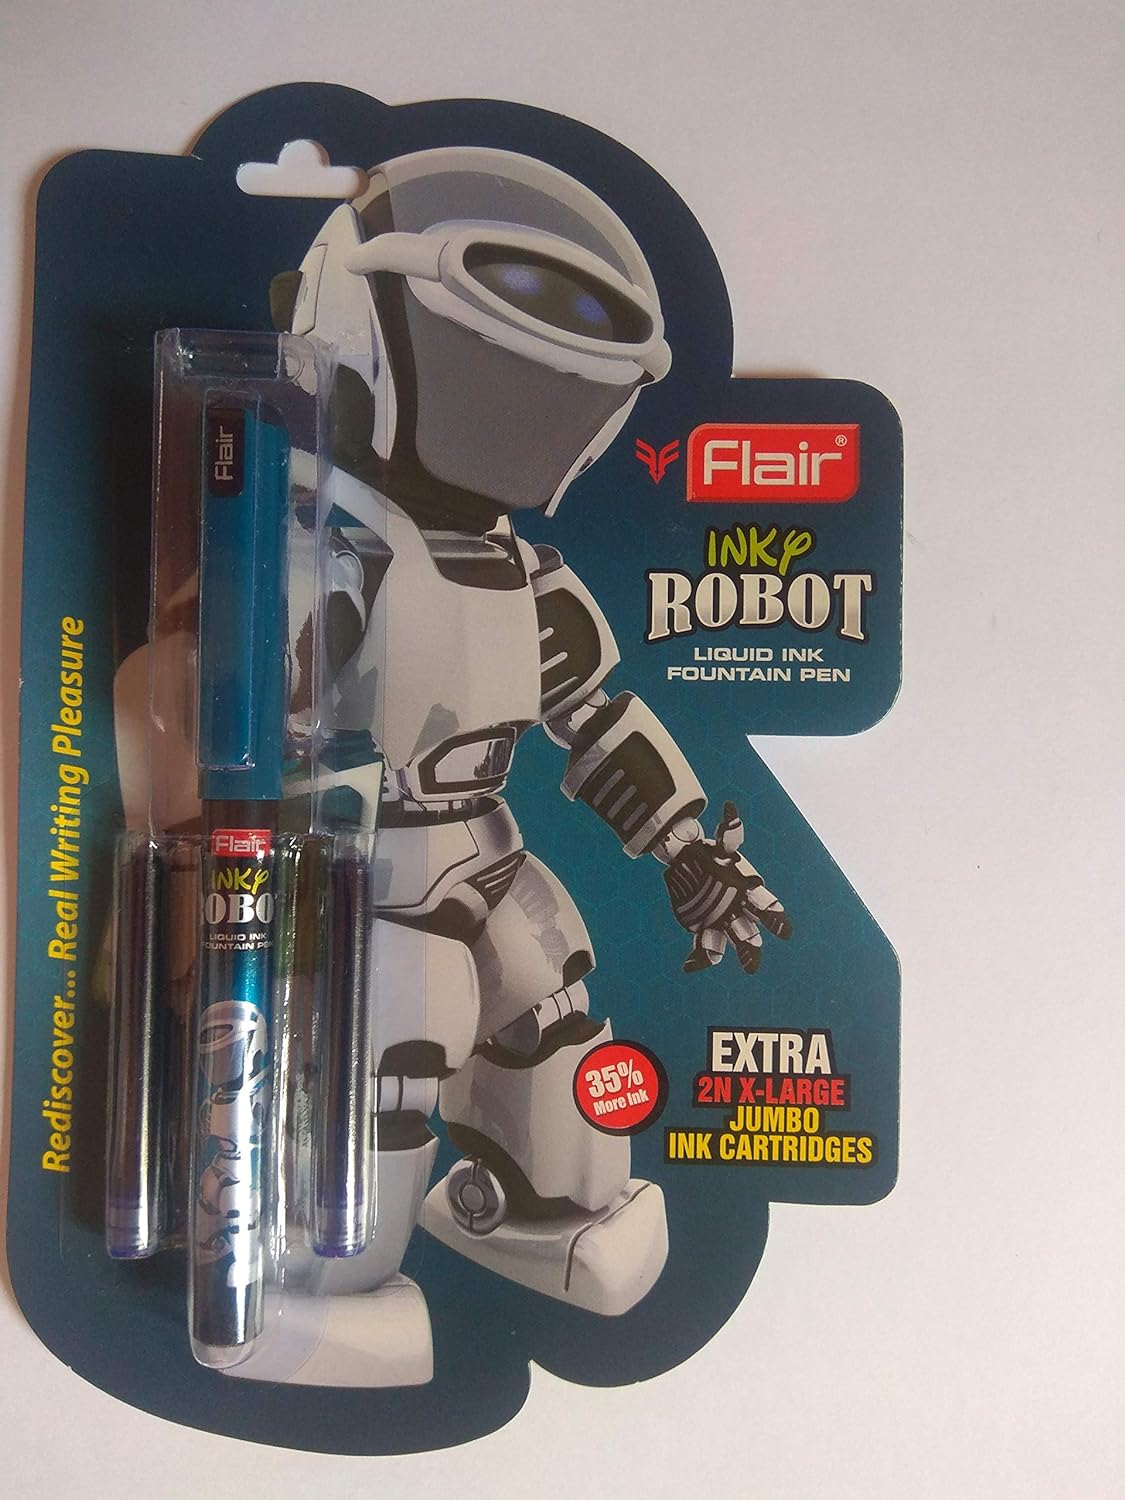 Flair Inky Series Robot Liquid Ink Fountain Pen Blister Pack - Blue Ink